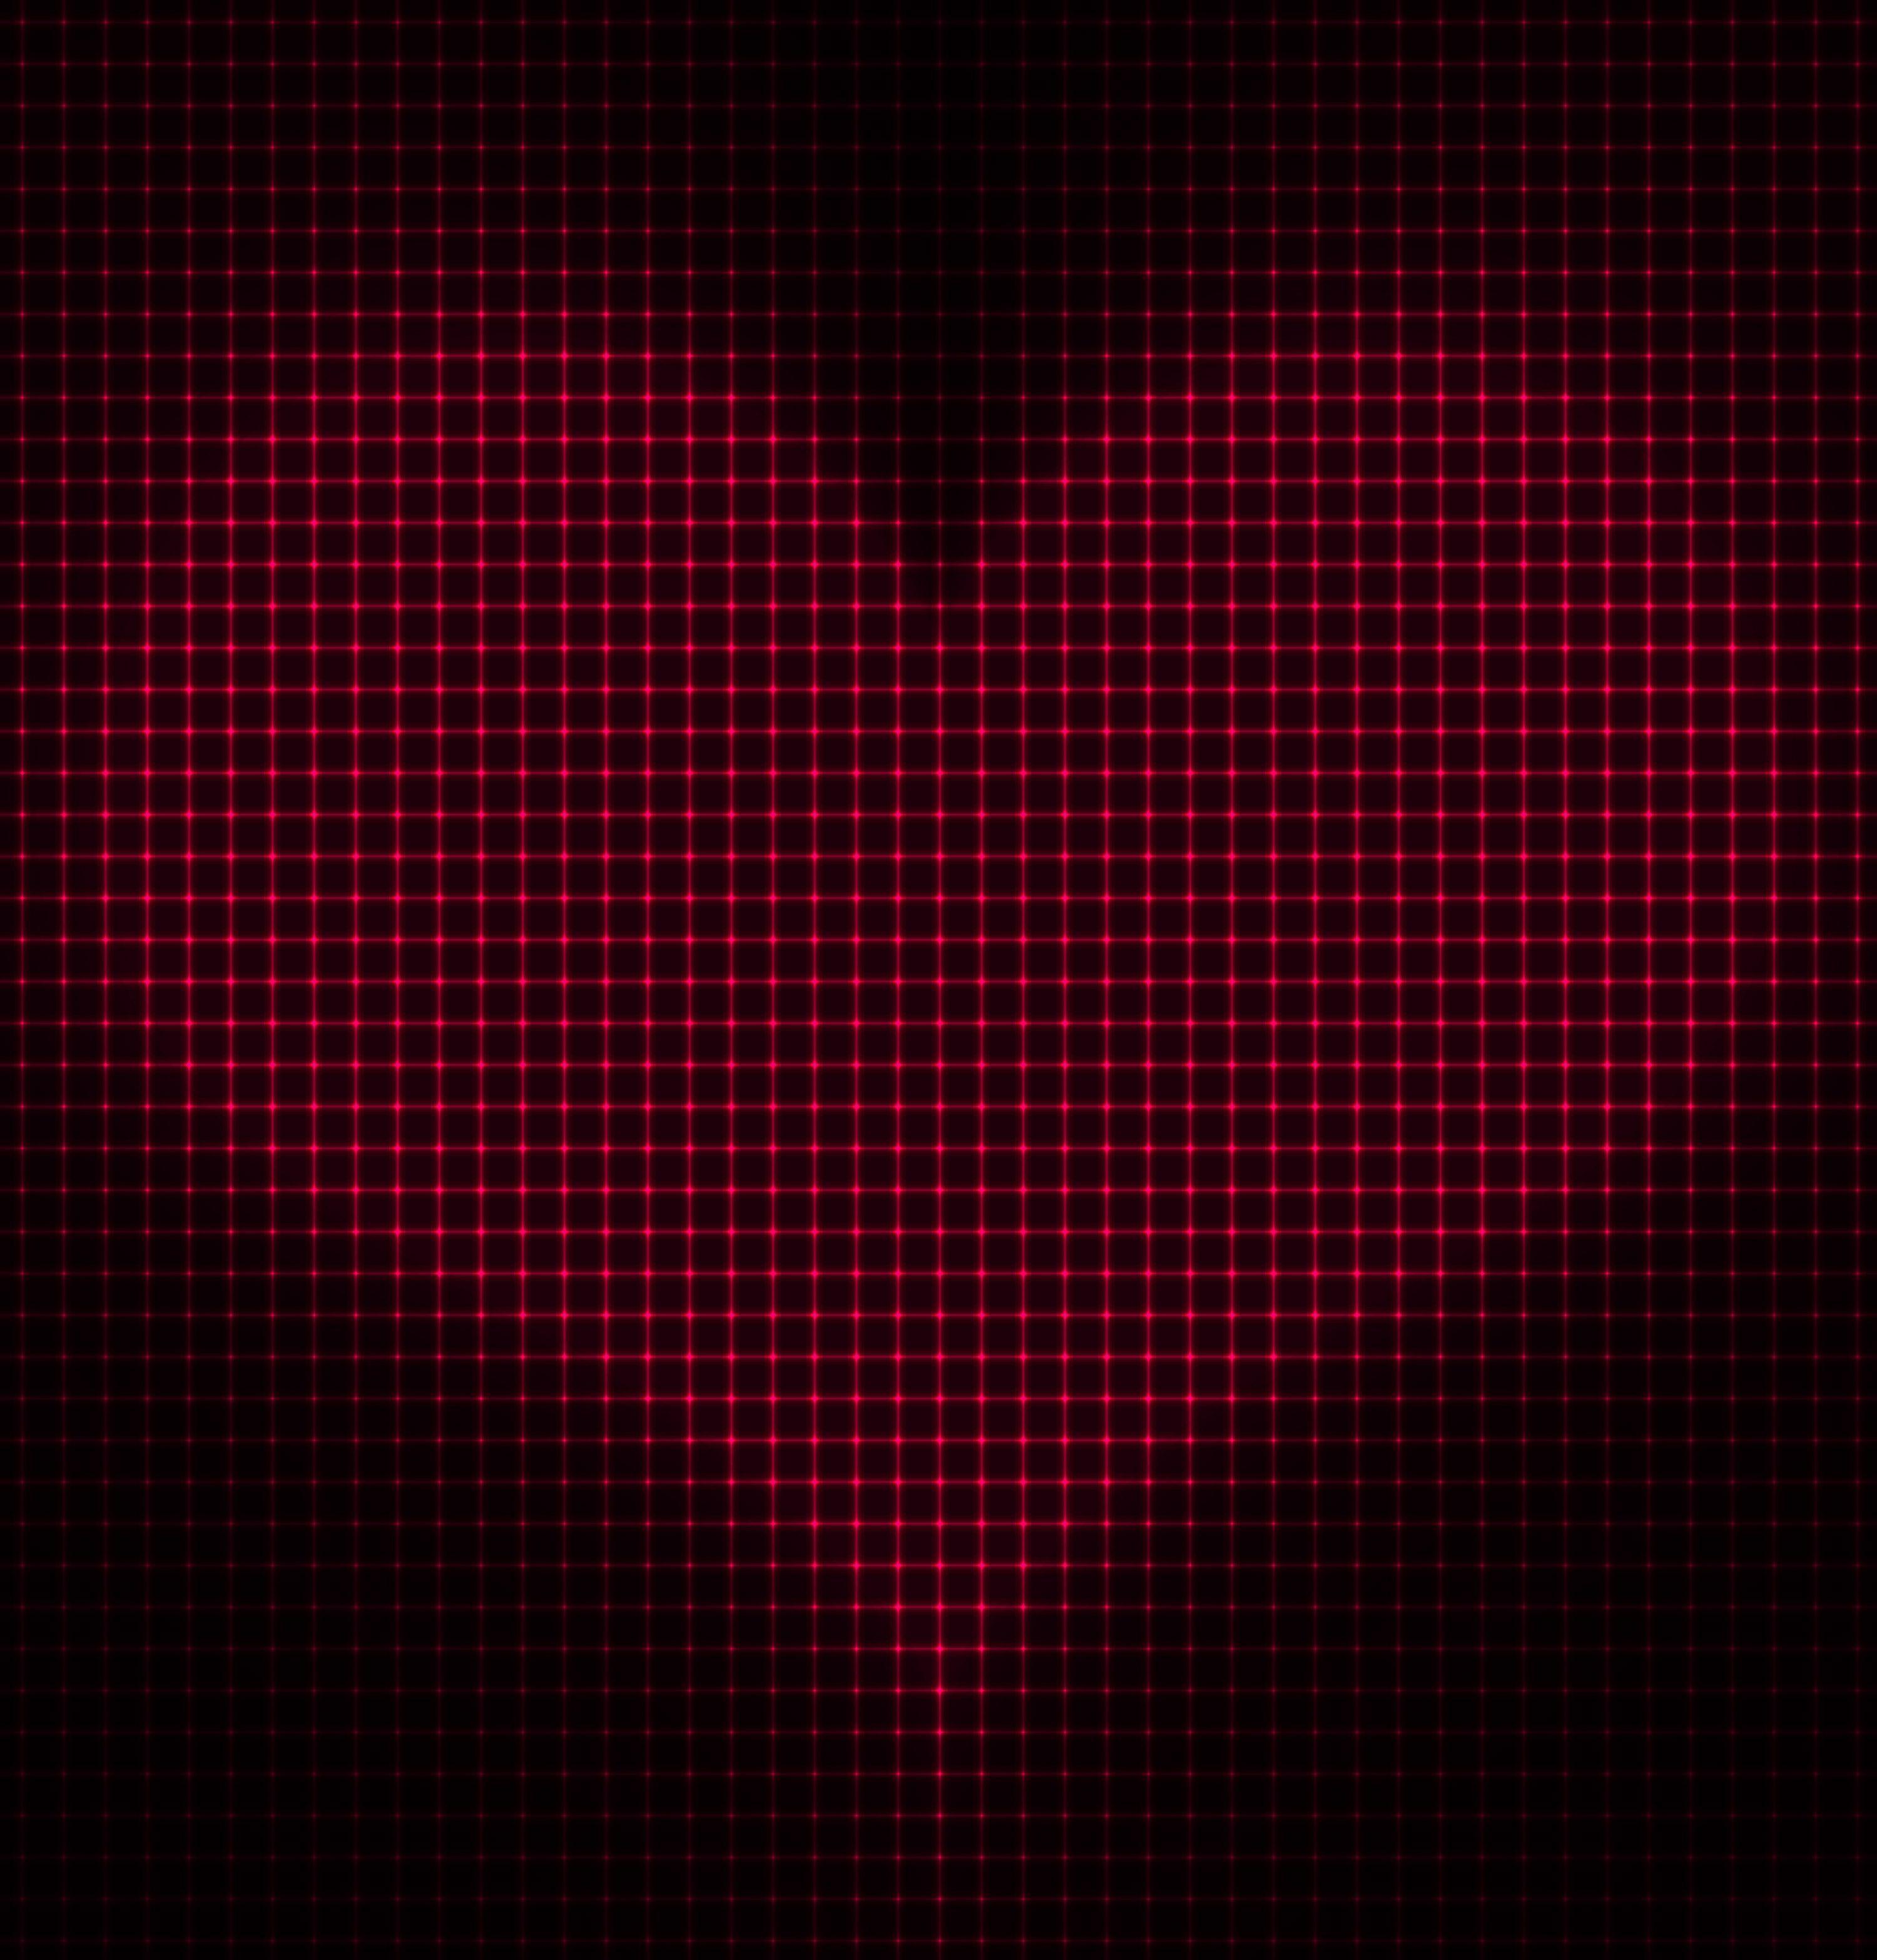 Black Background with Red Heart